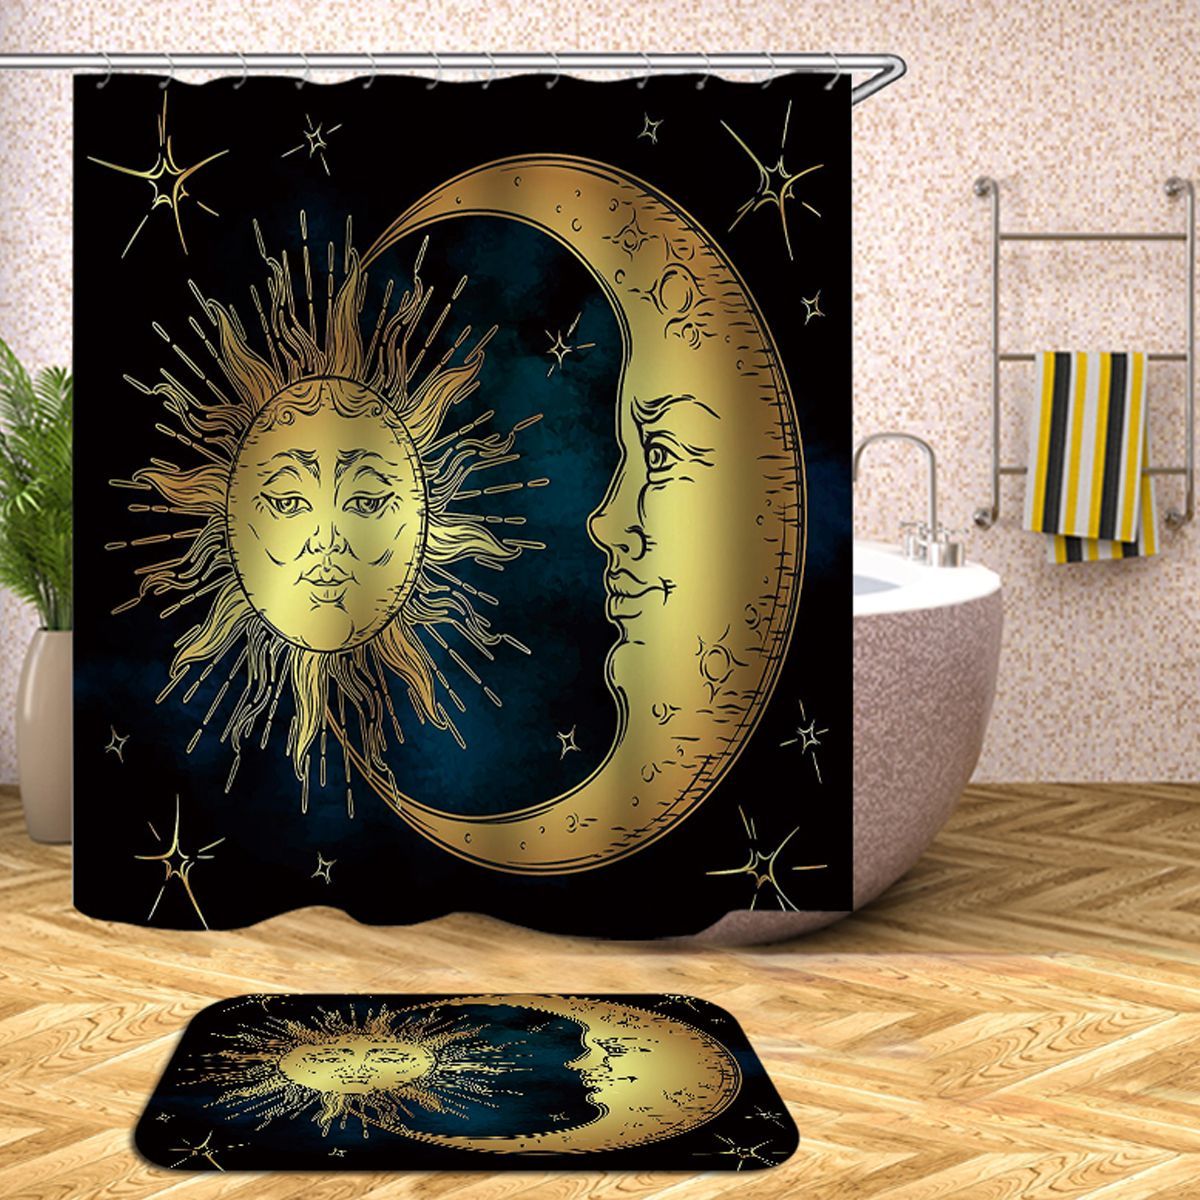 180x180cm-Sun-Bathroom-Waterproof-Polyester-Fabric-Shower-Curtains-With-12-Hooks--Toilet-Mat-Rug-1554535